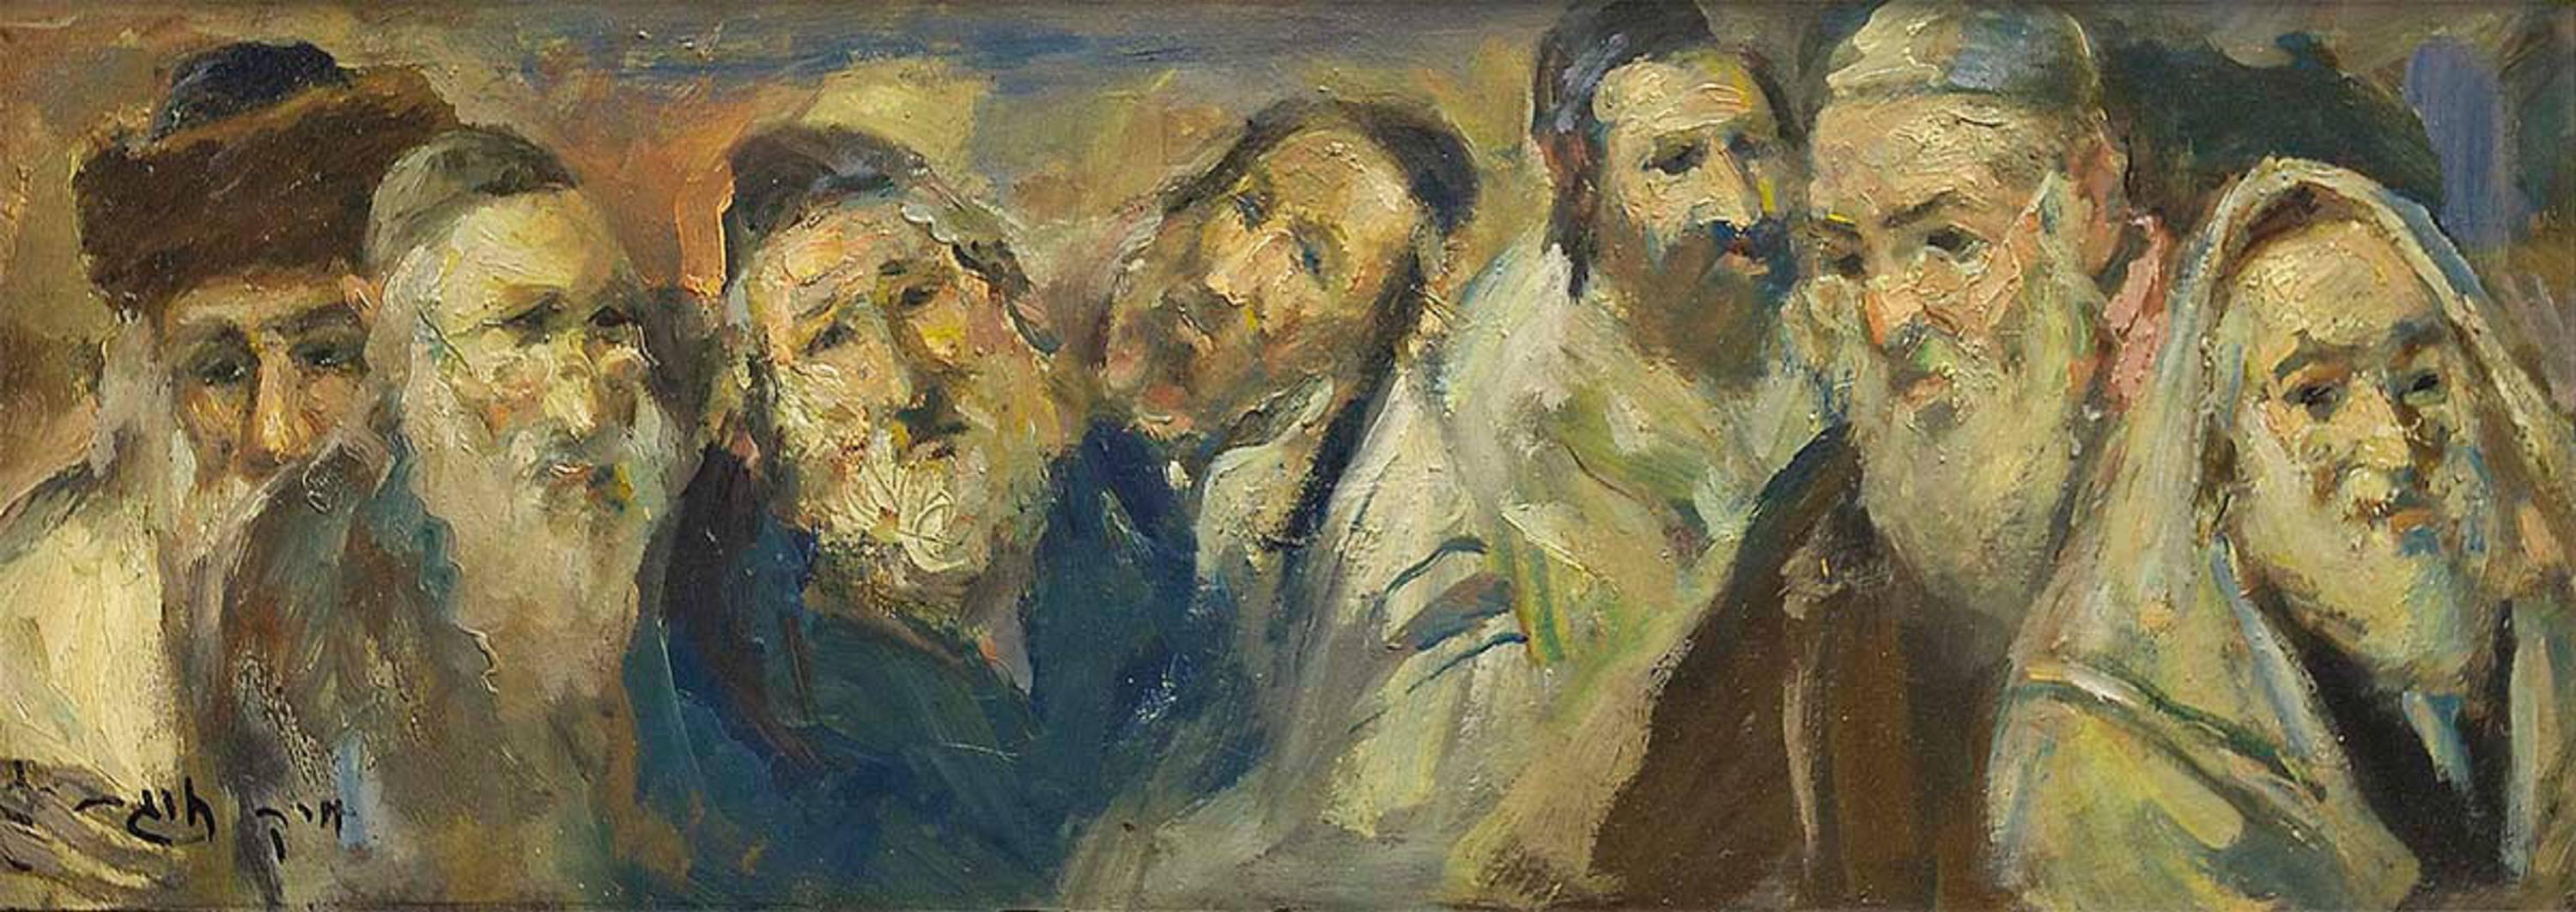 Scholars and Rabbis, Judaica Oil Painting